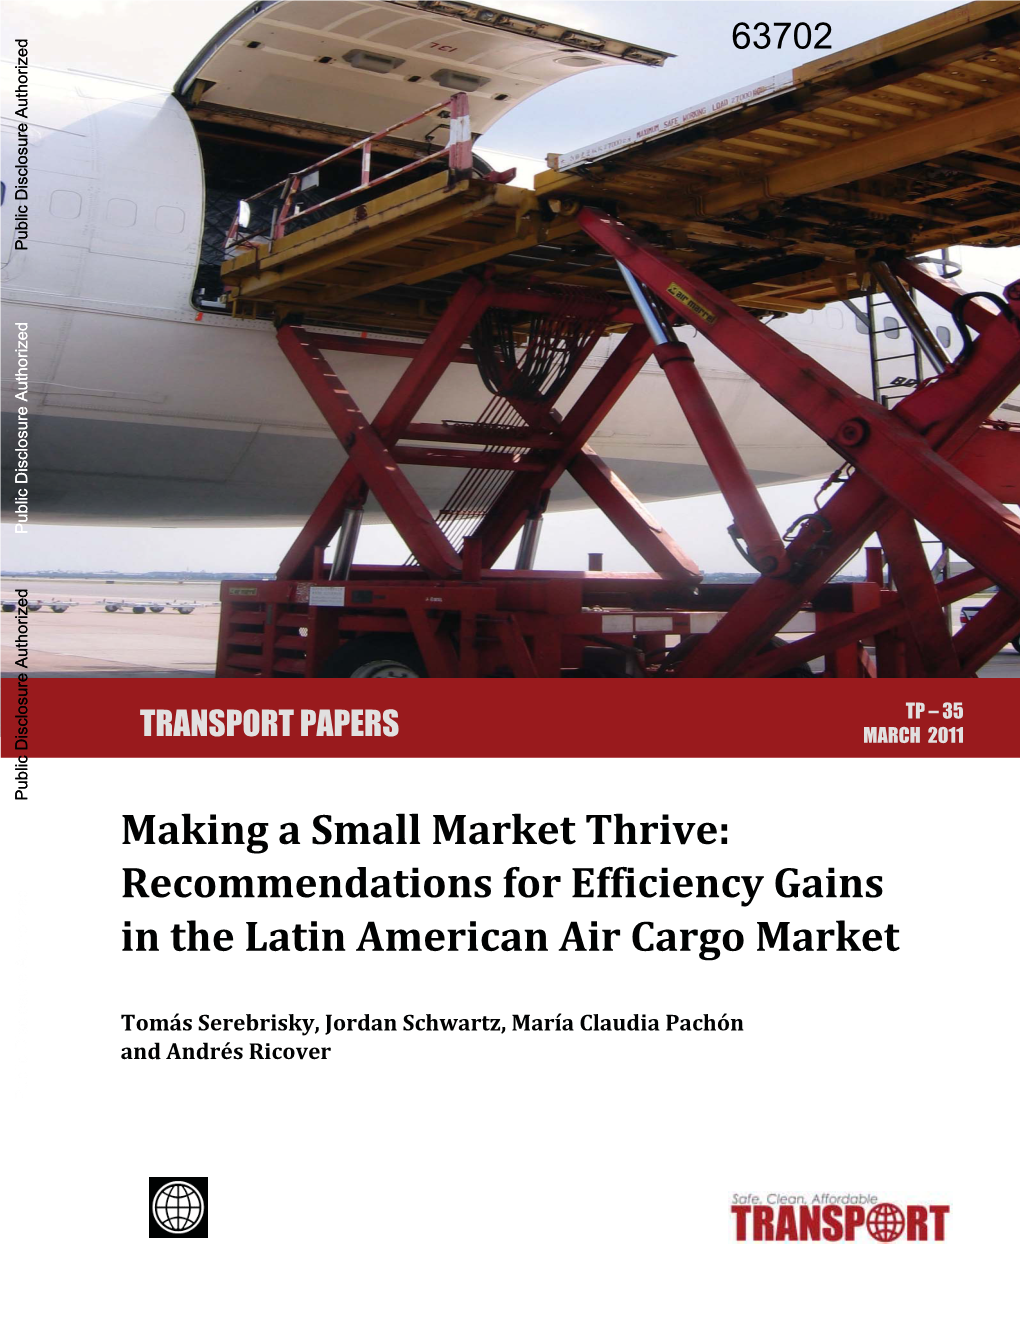 Recommendations for Efficiency Gains in the Latin American Air Cargo Market